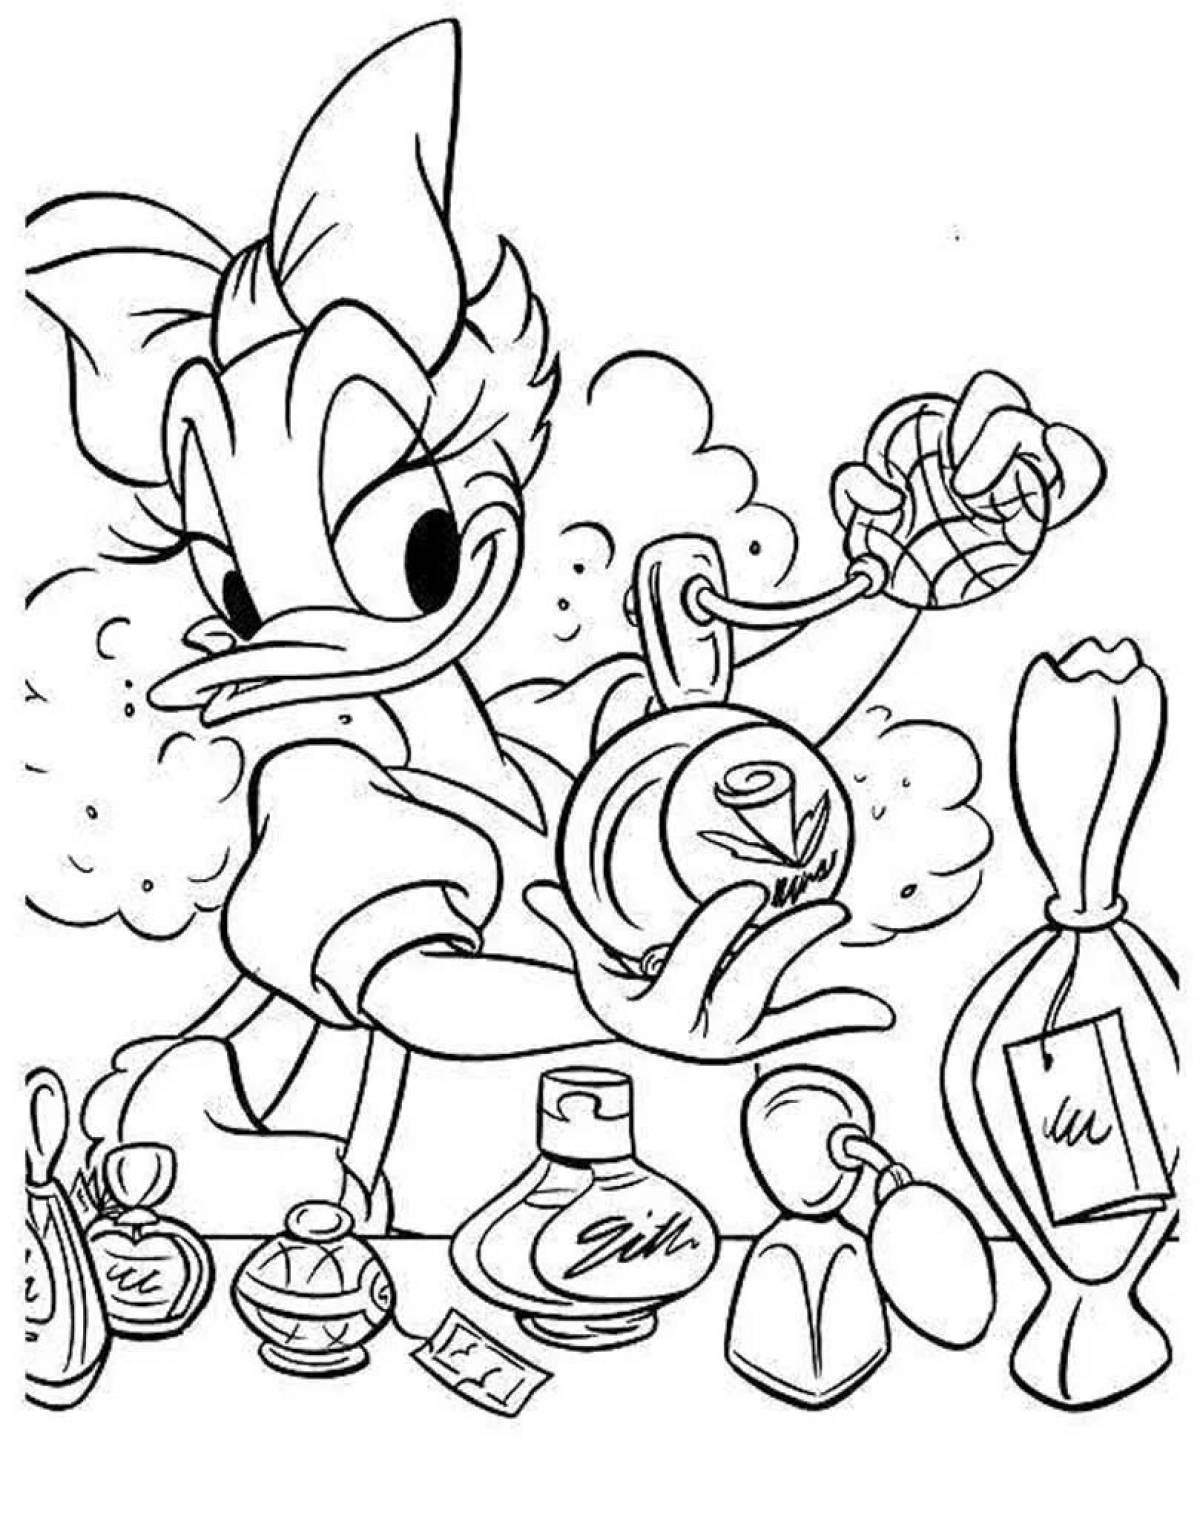 Coloring page sparkling donut